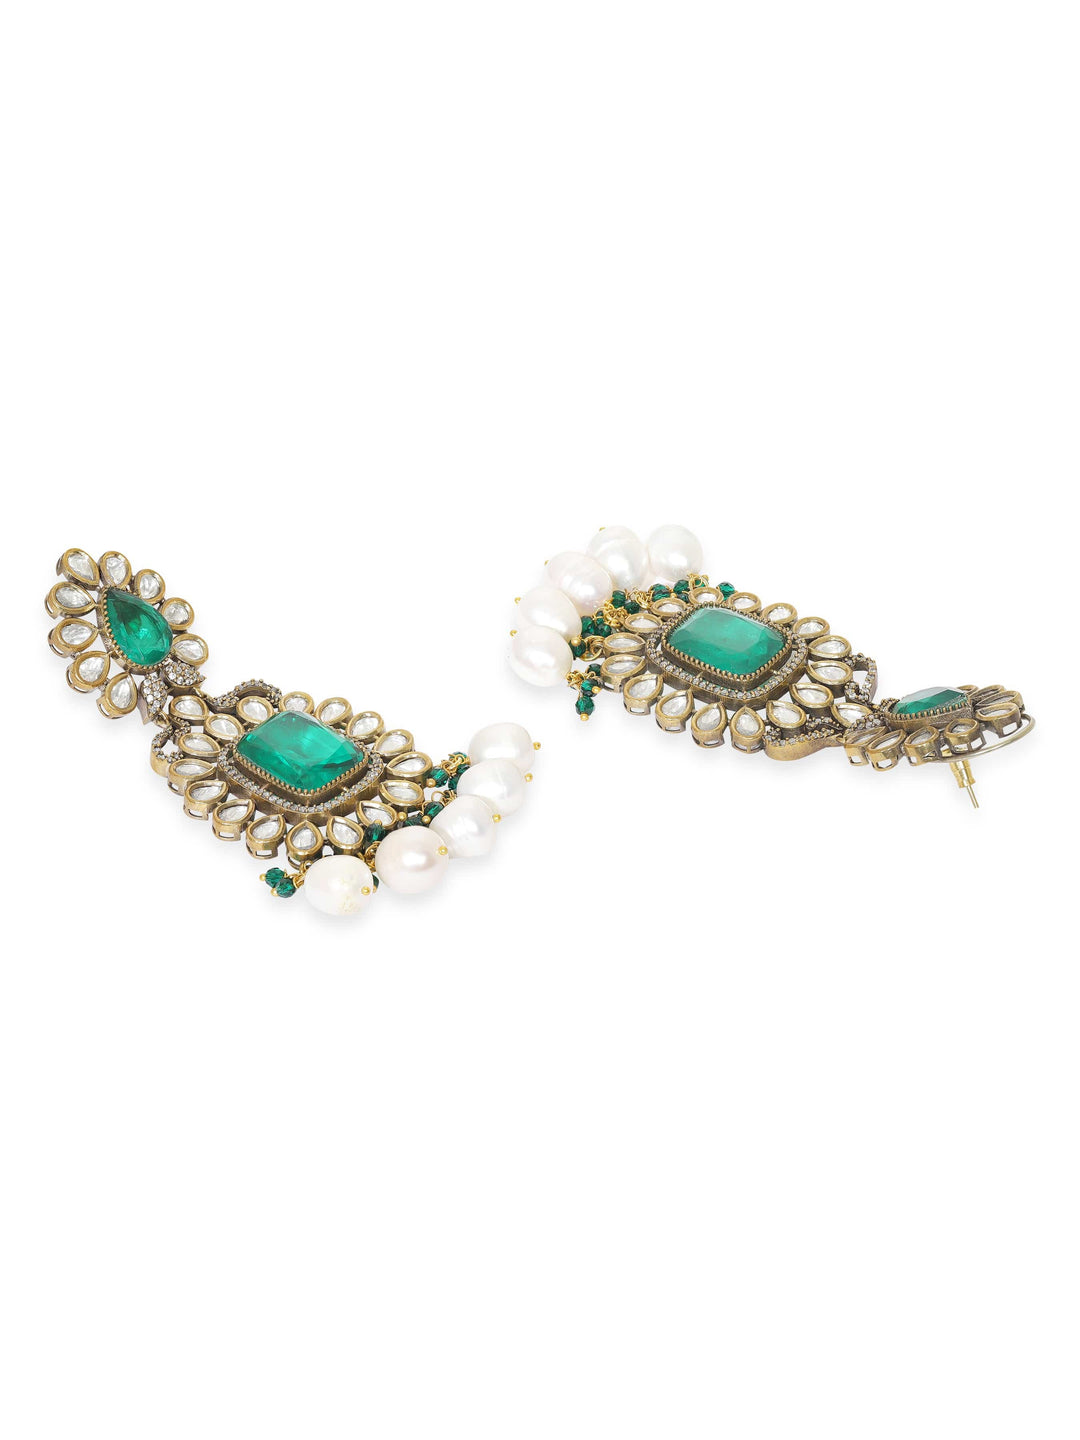 Exquisite Gold-Plated Kundan and Emerald Dangle Earrings Earrings